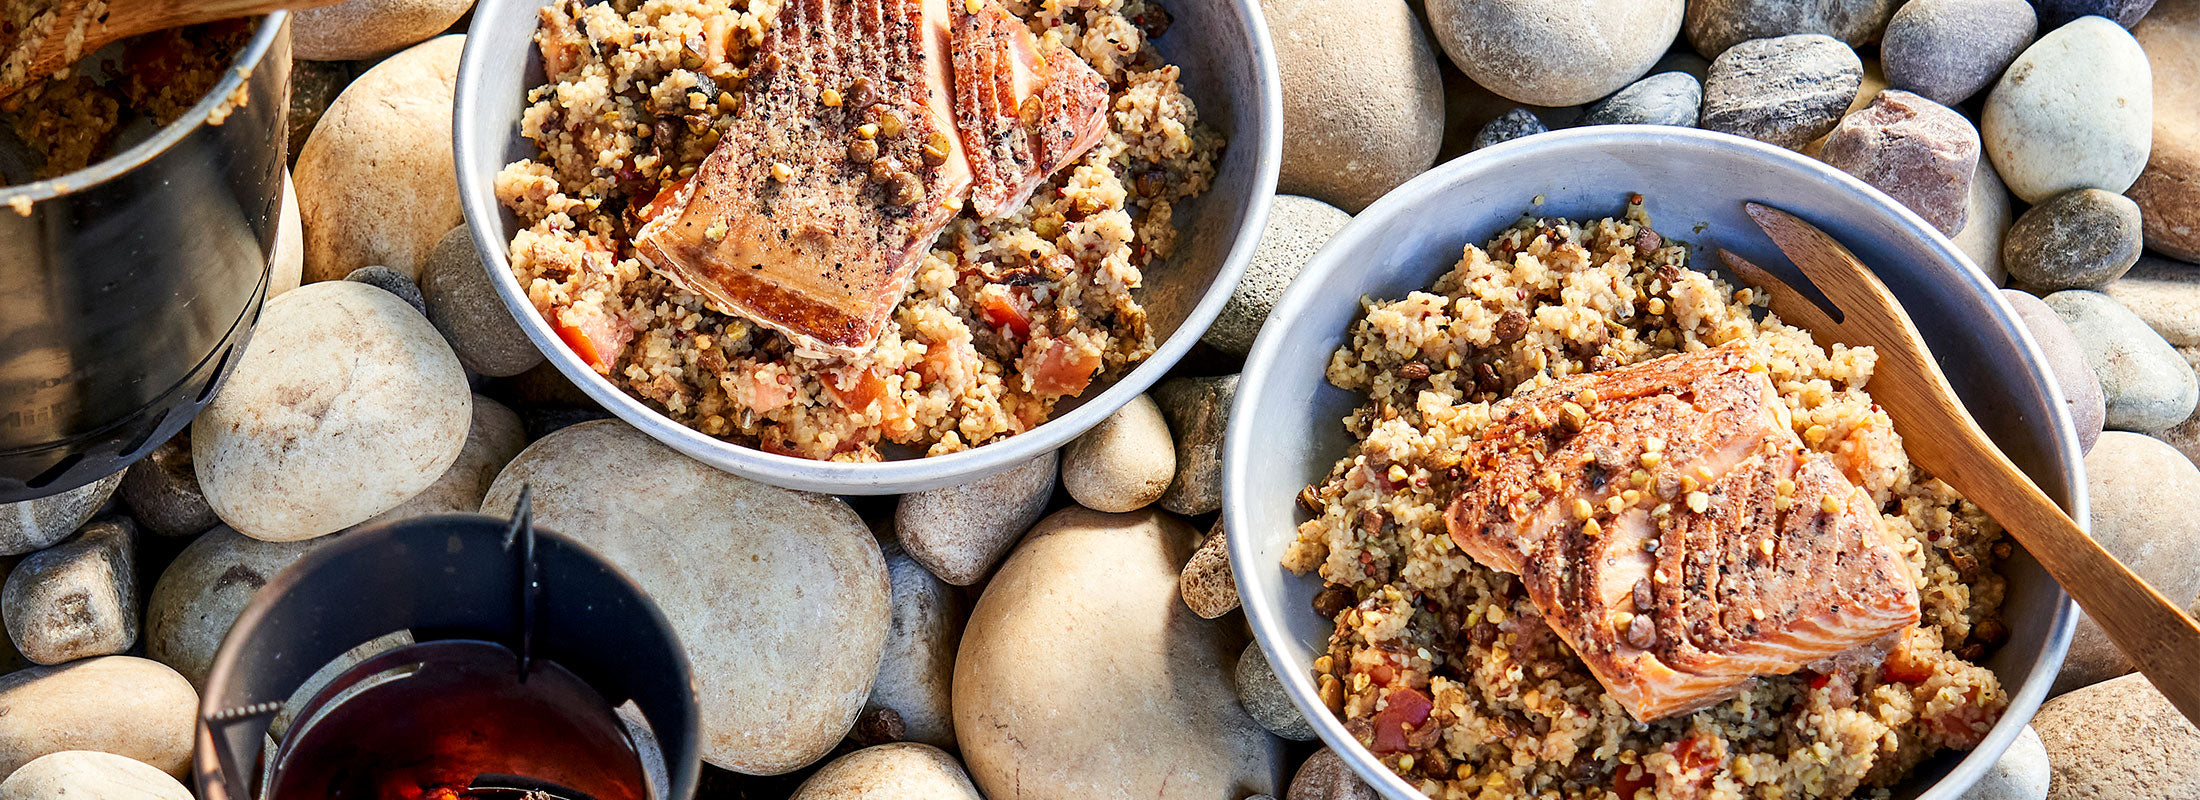 Two bowls of Patagonia Provisions Wild Pink Salmon and Savory Grains rest on a rocky beach